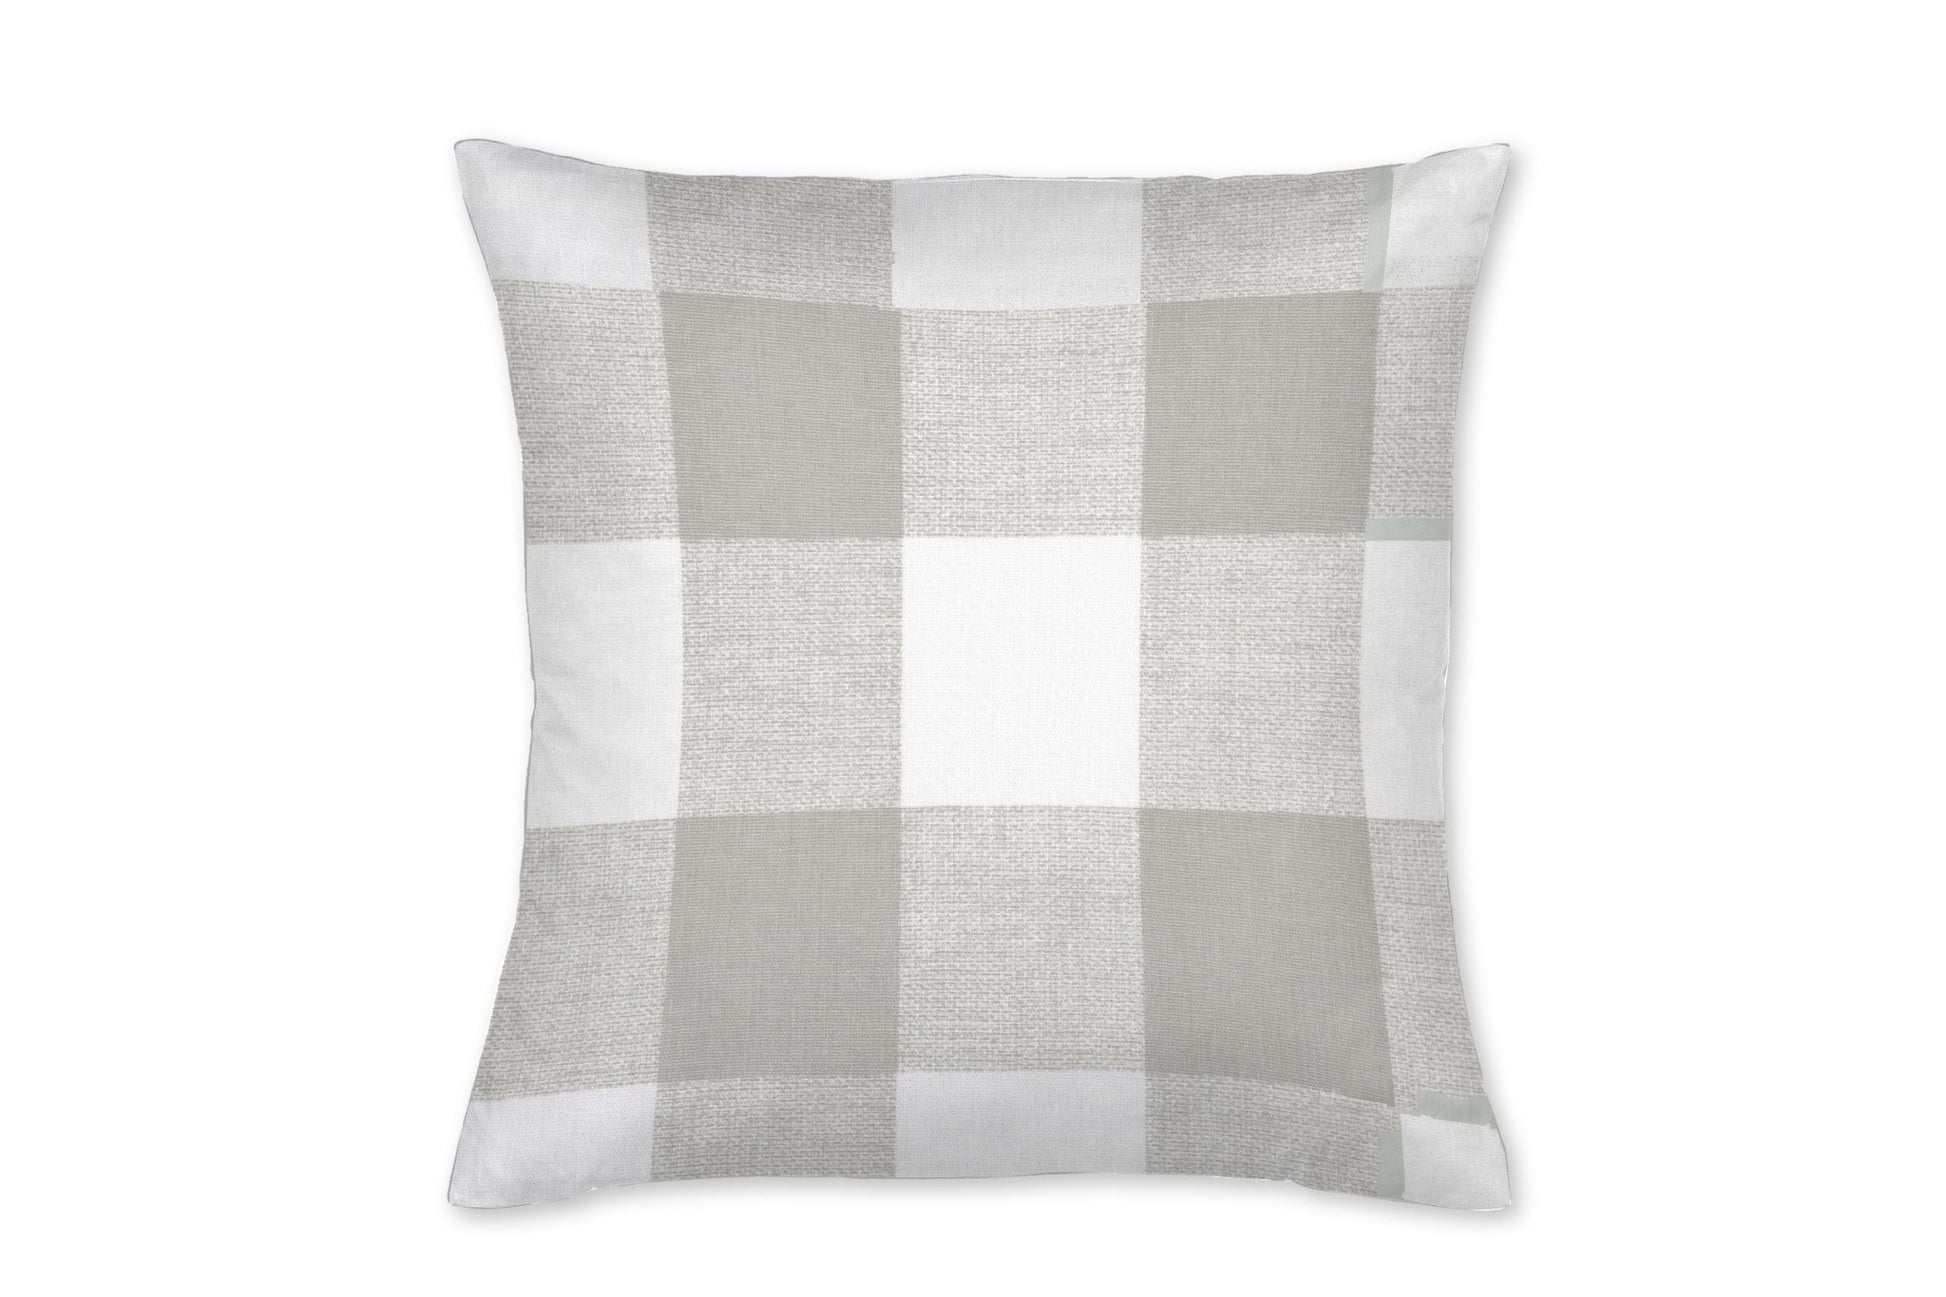 White and Gray Buffalo Plaid Throw Pillow - New Arrivals Inc